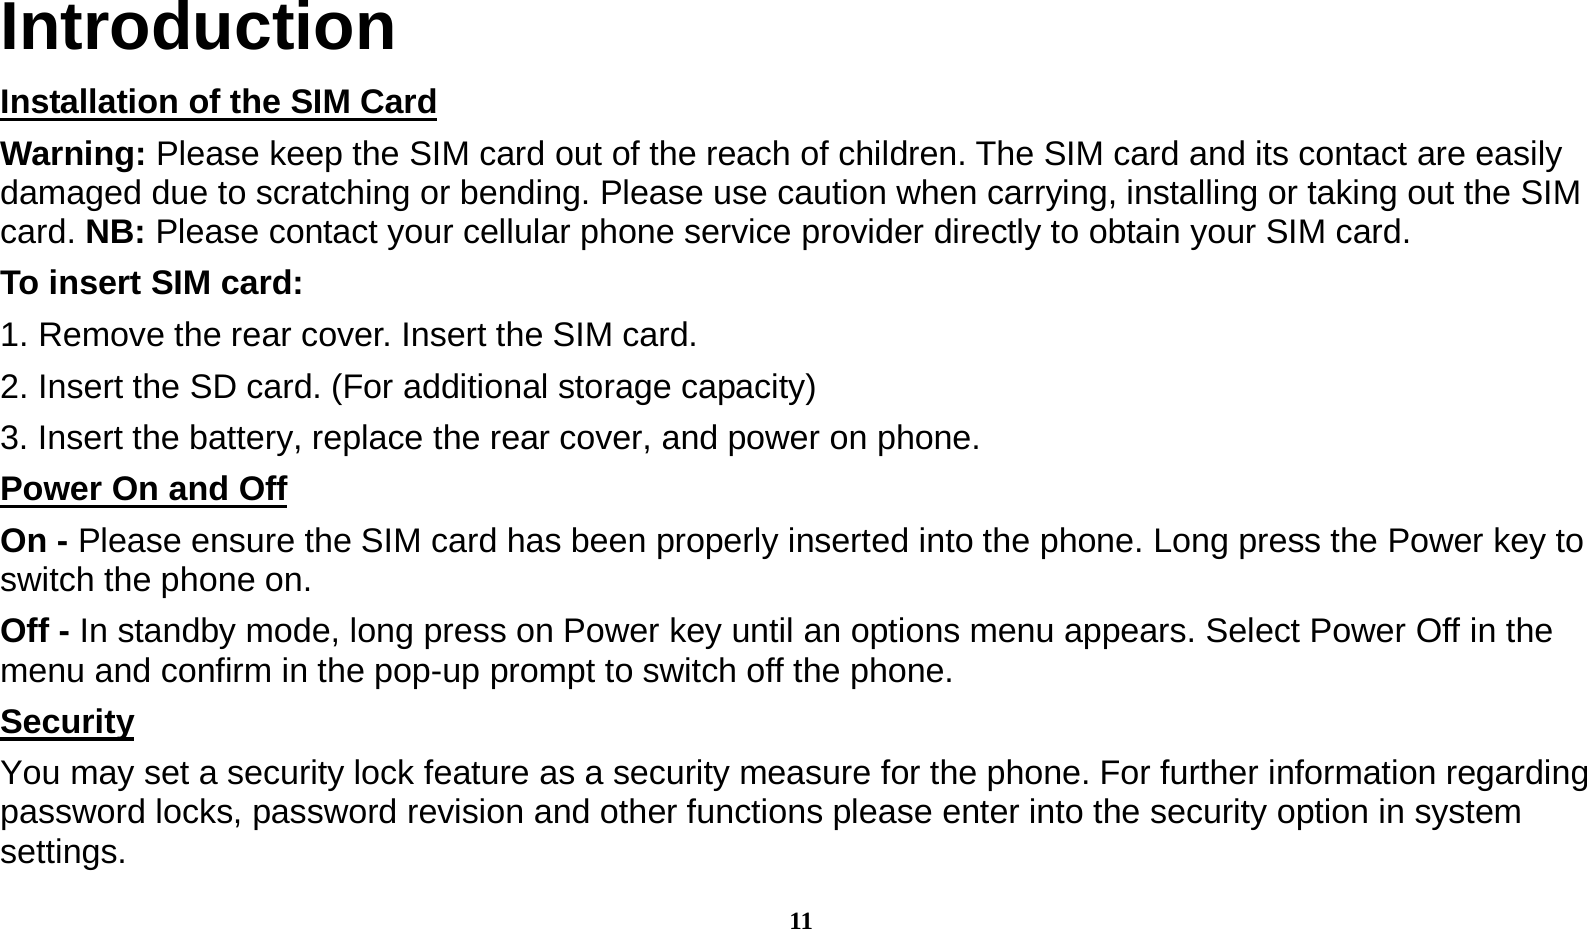  11 Introduction Installation of the SIM Card                                                                         Warning: Please keep the SIM card out of the reach of children. The SIM card and its contact are easily damaged due to scratching or bending. Please use caution when carrying, installing or taking out the SIM card. NB: Please contact your cellular phone service provider directly to obtain your SIM card. To insert SIM card: 1. Remove the rear cover. Insert the SIM card.   2. Insert the SD card. (For additional storage capacity) 3. Insert the battery, replace the rear cover, and power on phone. Power On and Off                                                                                  On - Please ensure the SIM card has been properly inserted into the phone. Long press the Power key to switch the phone on. Off - In standby mode, long press on Power key until an options menu appears. Select Power Off in the menu and confirm in the pop-up prompt to switch off the phone. Security                                                                                           You may set a security lock feature as a security measure for the phone. For further information regarding password locks, password revision and other functions please enter into the security option in system settings. 